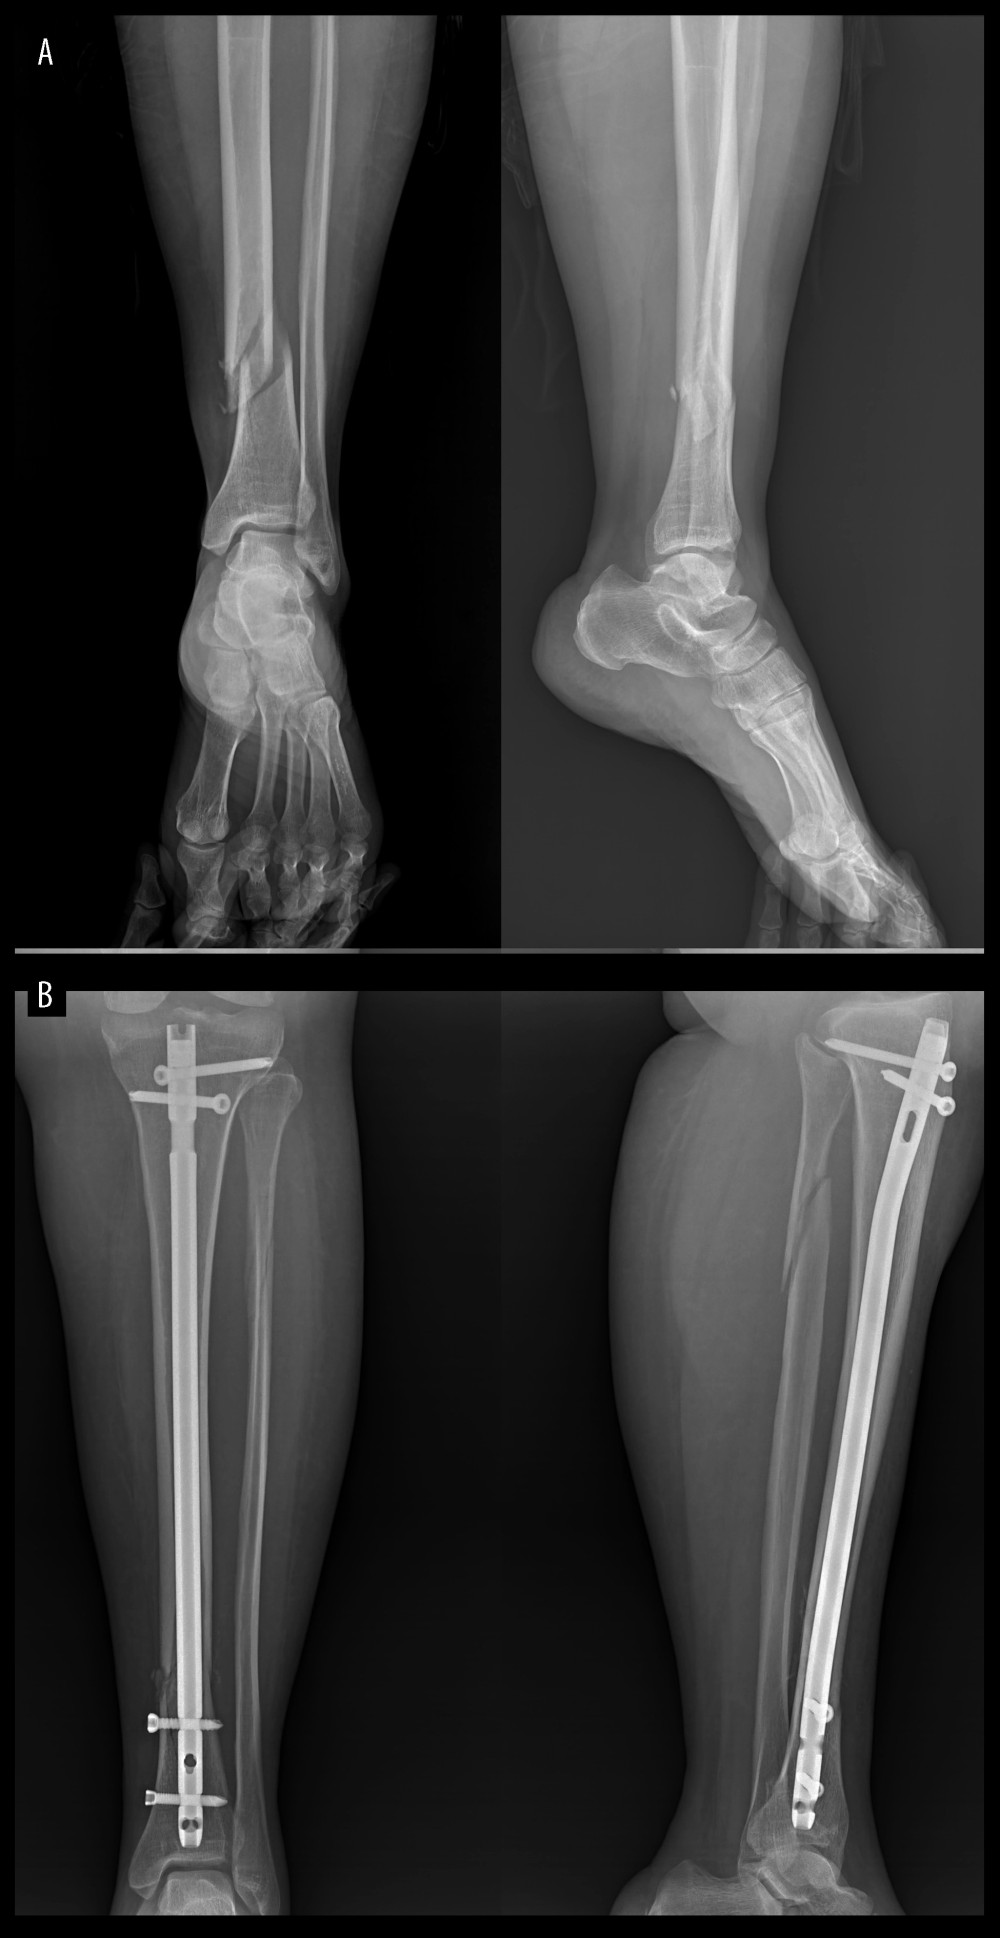 (A) Preoperative and (B) postoperative plain radiographic views of an extraarticular distal tibial fracture treated with interlocking intramedullary nailing (IMN).